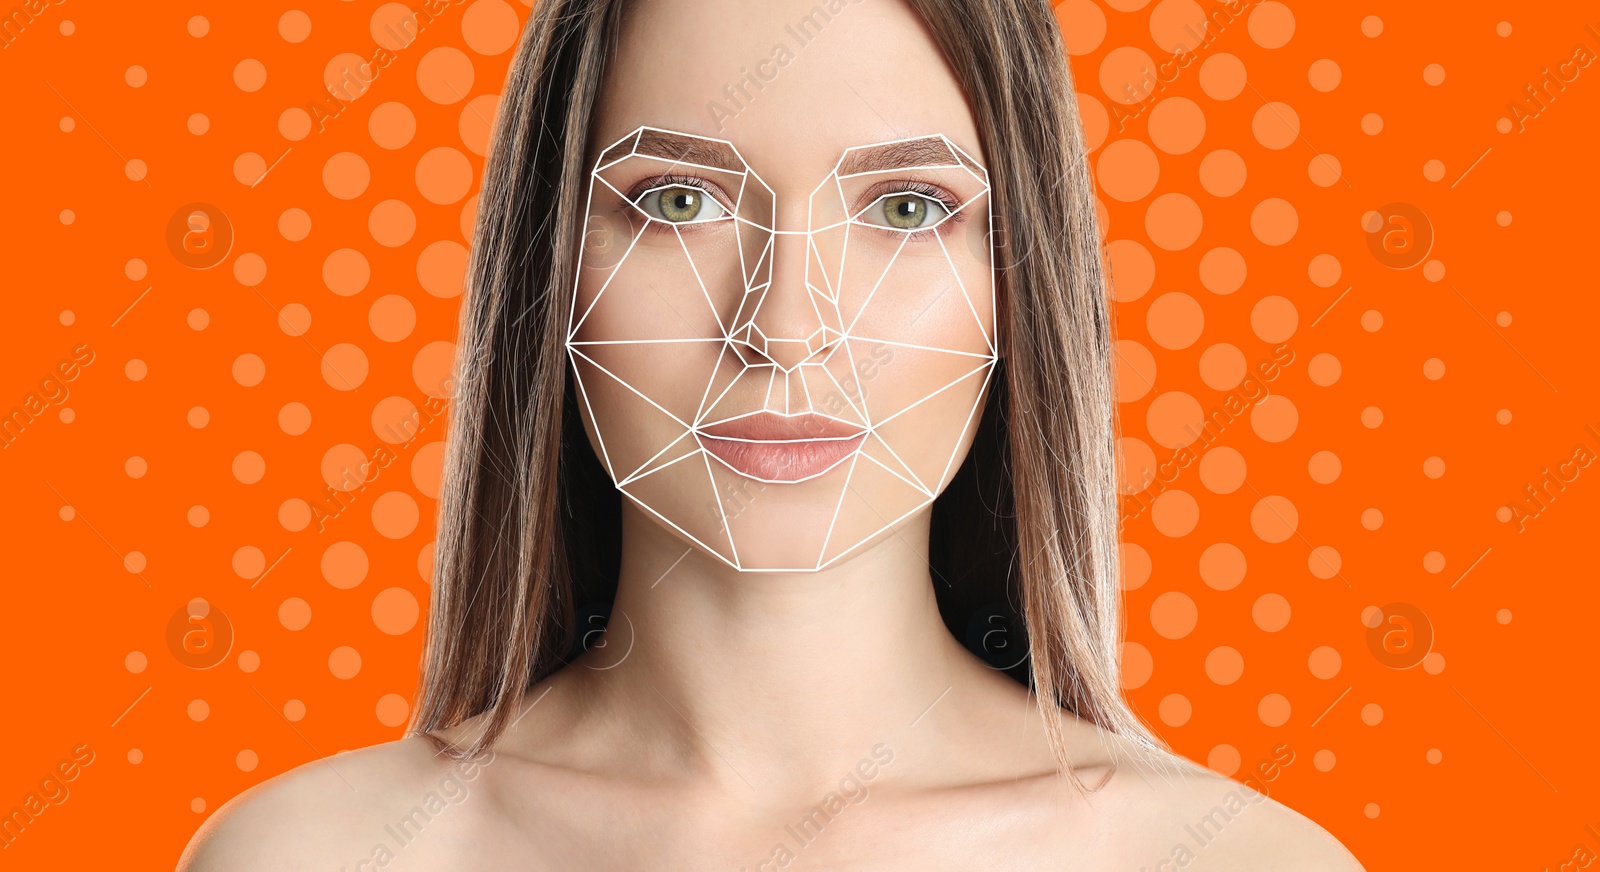 Image of Facial recognition system. Woman with digital biometric grid on orange background